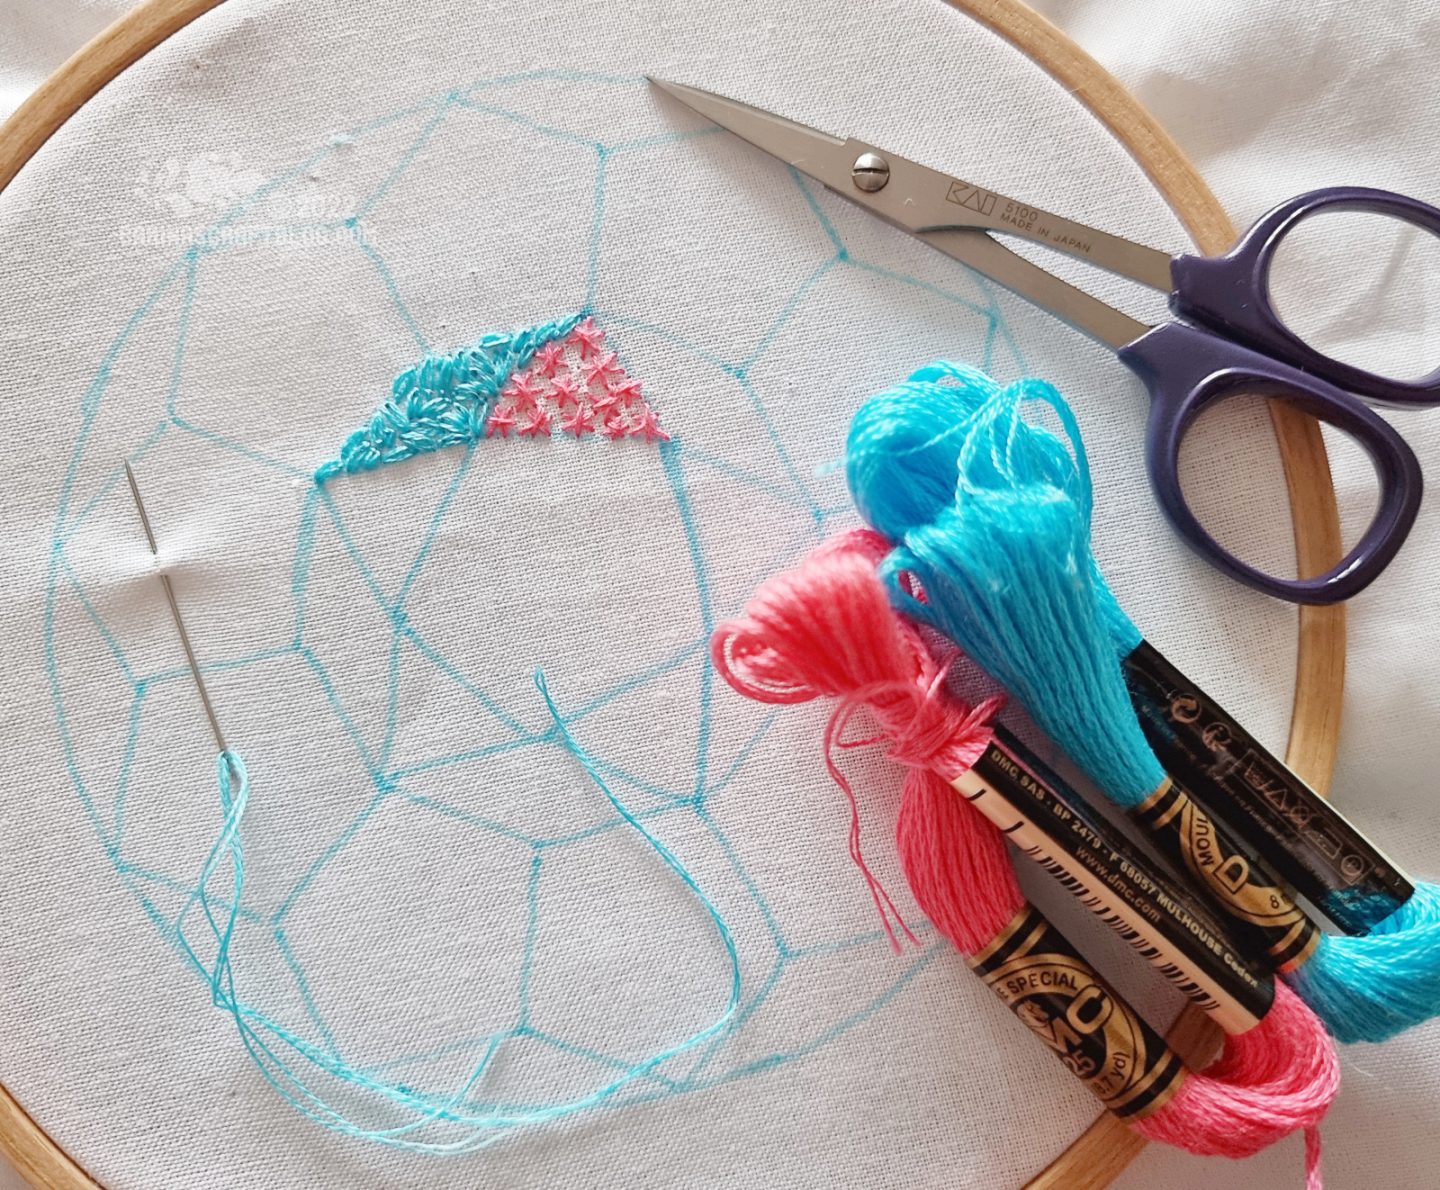 Over head view of embroidery hoop with white fabric. On the fabric is drawn a geometric design in a circle. Two of the sections are filled with stitches.